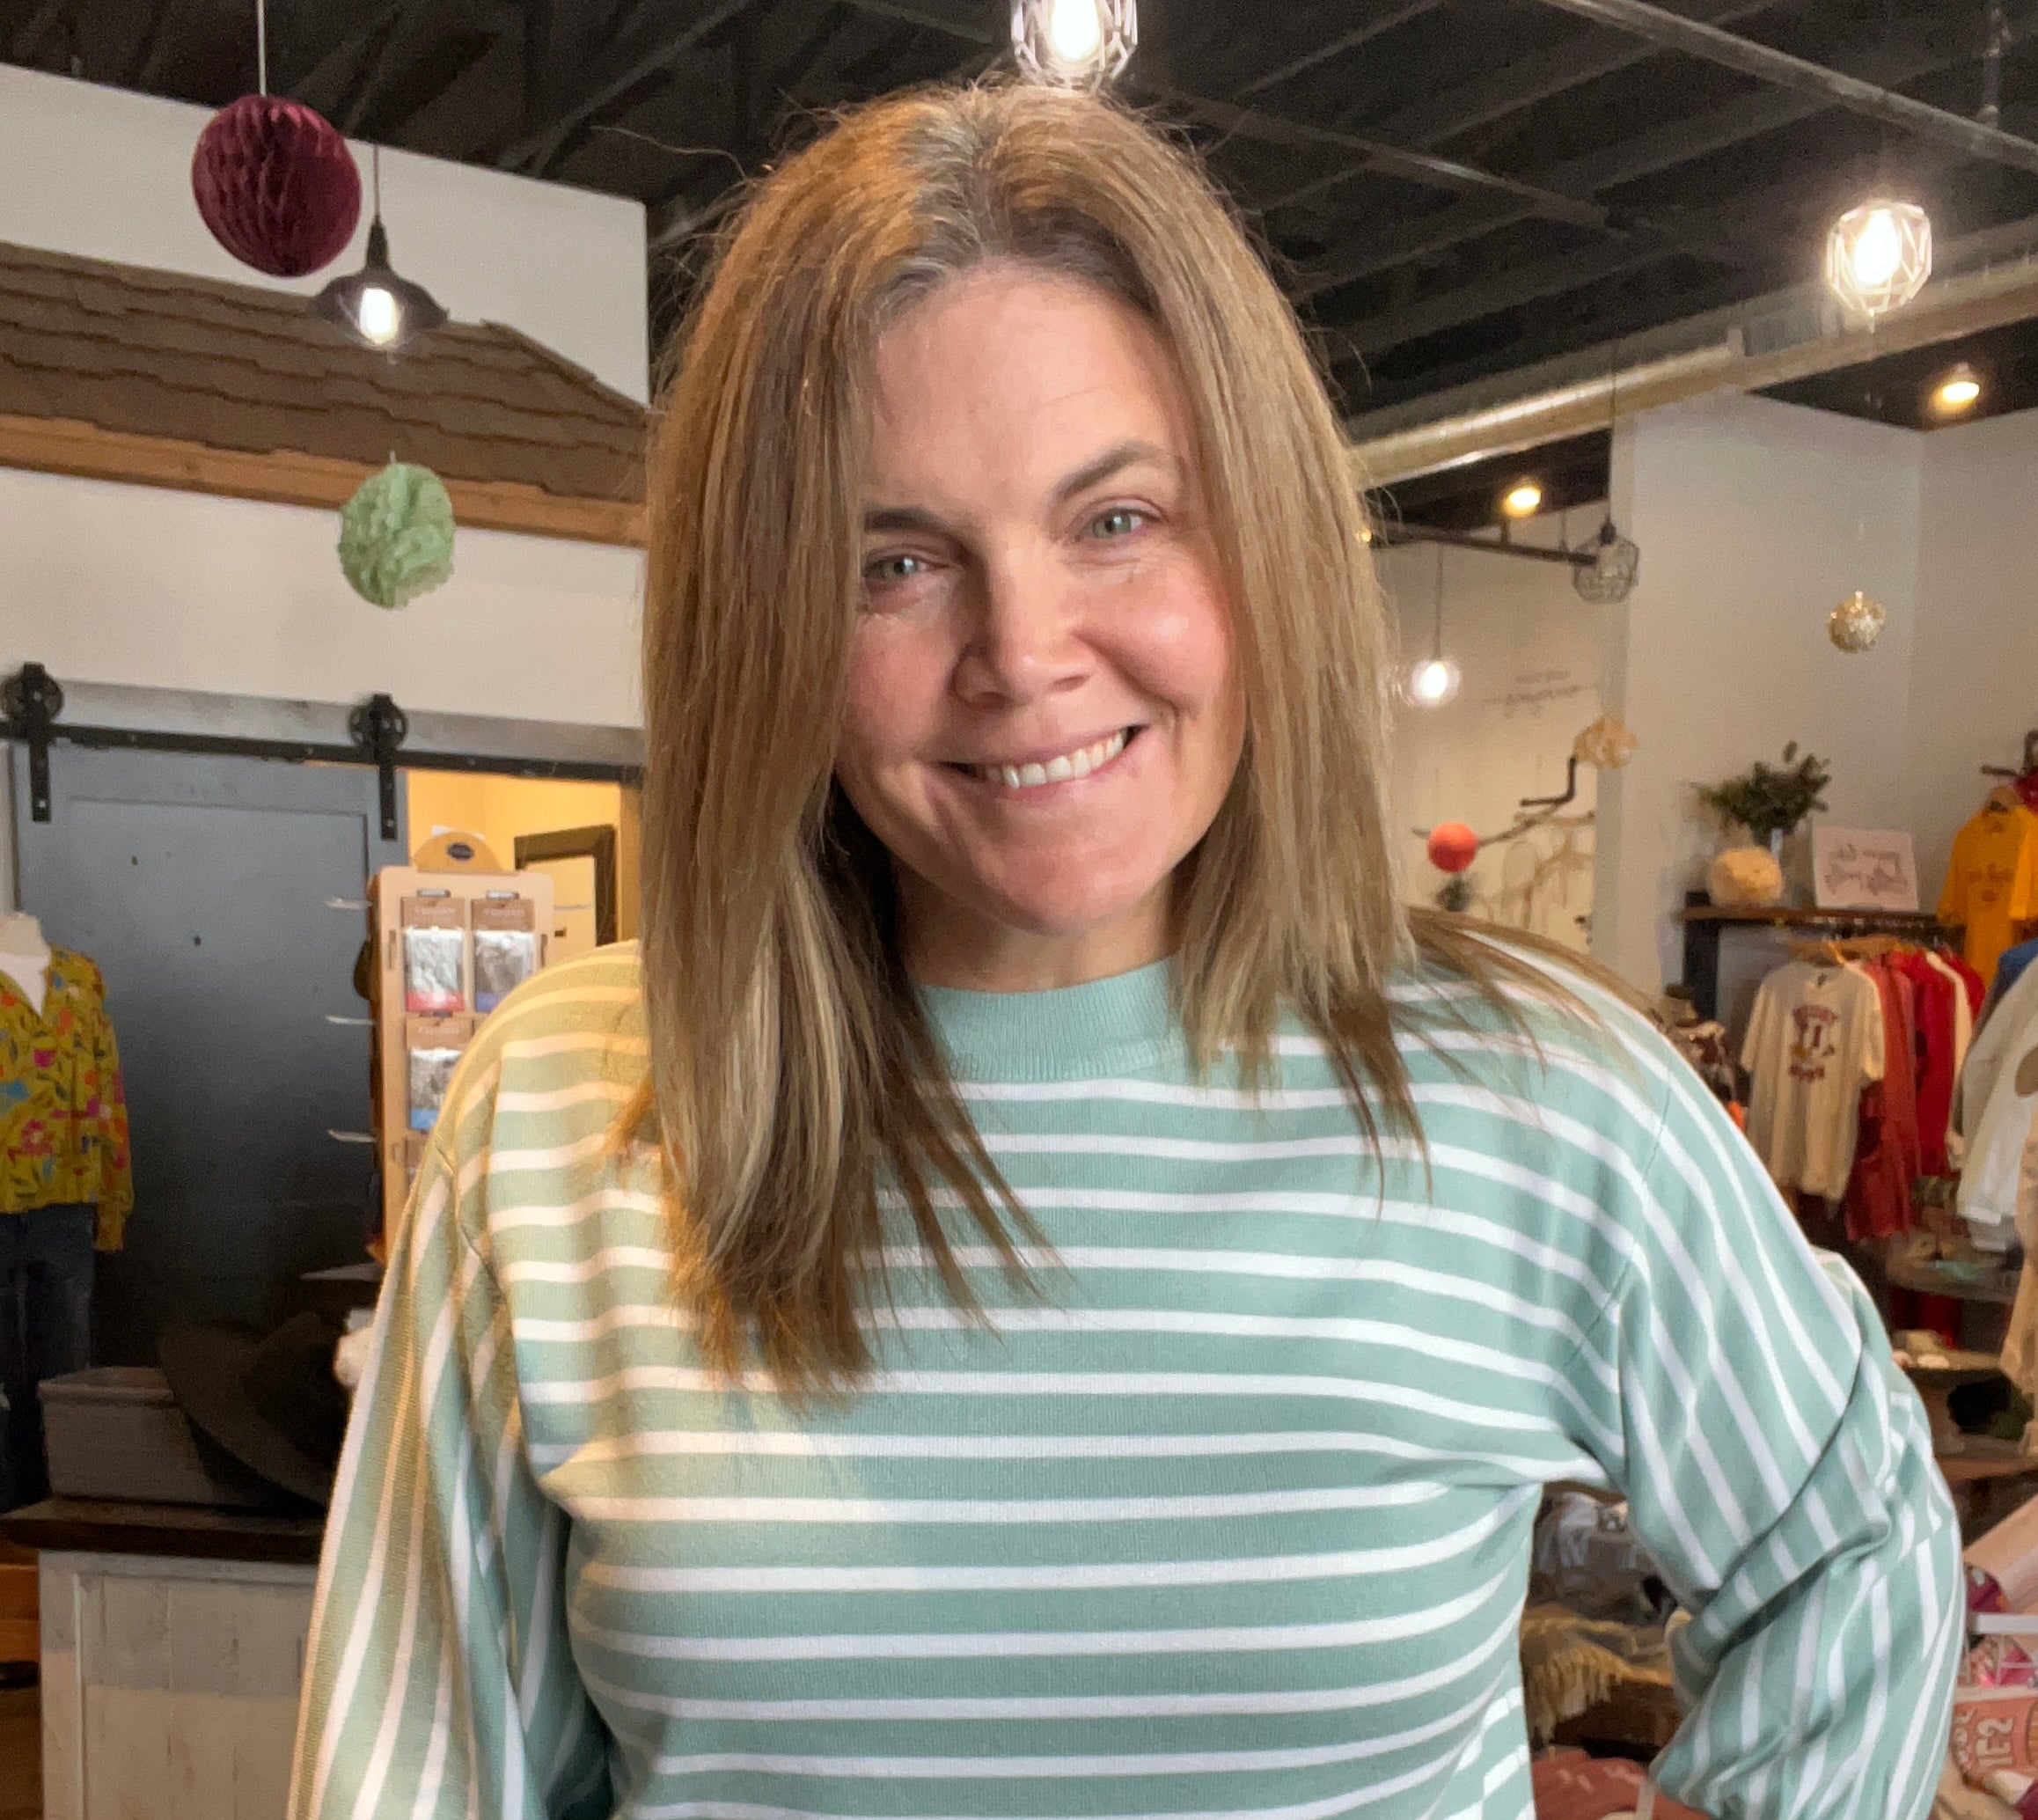 Marlie Striped Sweater-Sweaters-Be Cool-The Funky Zebra Ames, Women's Fashion Boutique in Ames, Iowa